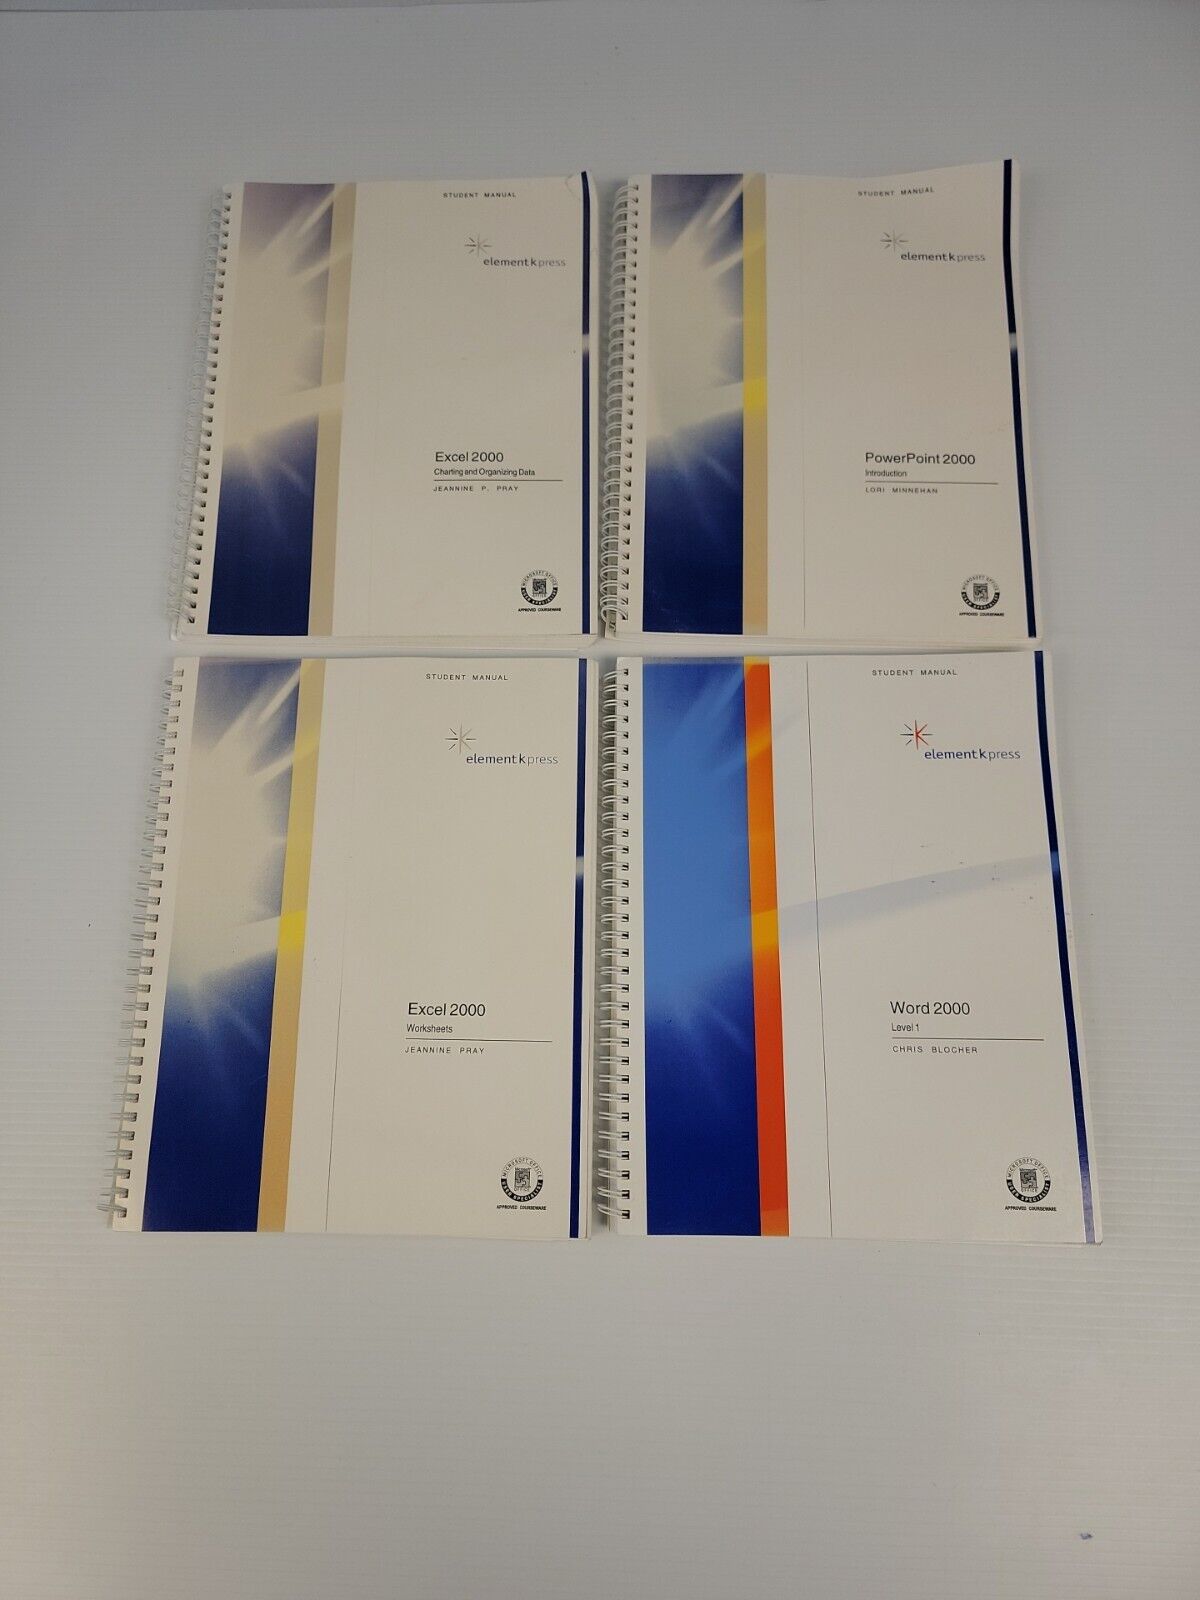 Microsoft Excel Powerpoint Word 2000 Student Manual – Lot of 4 Spiral Bound VTG